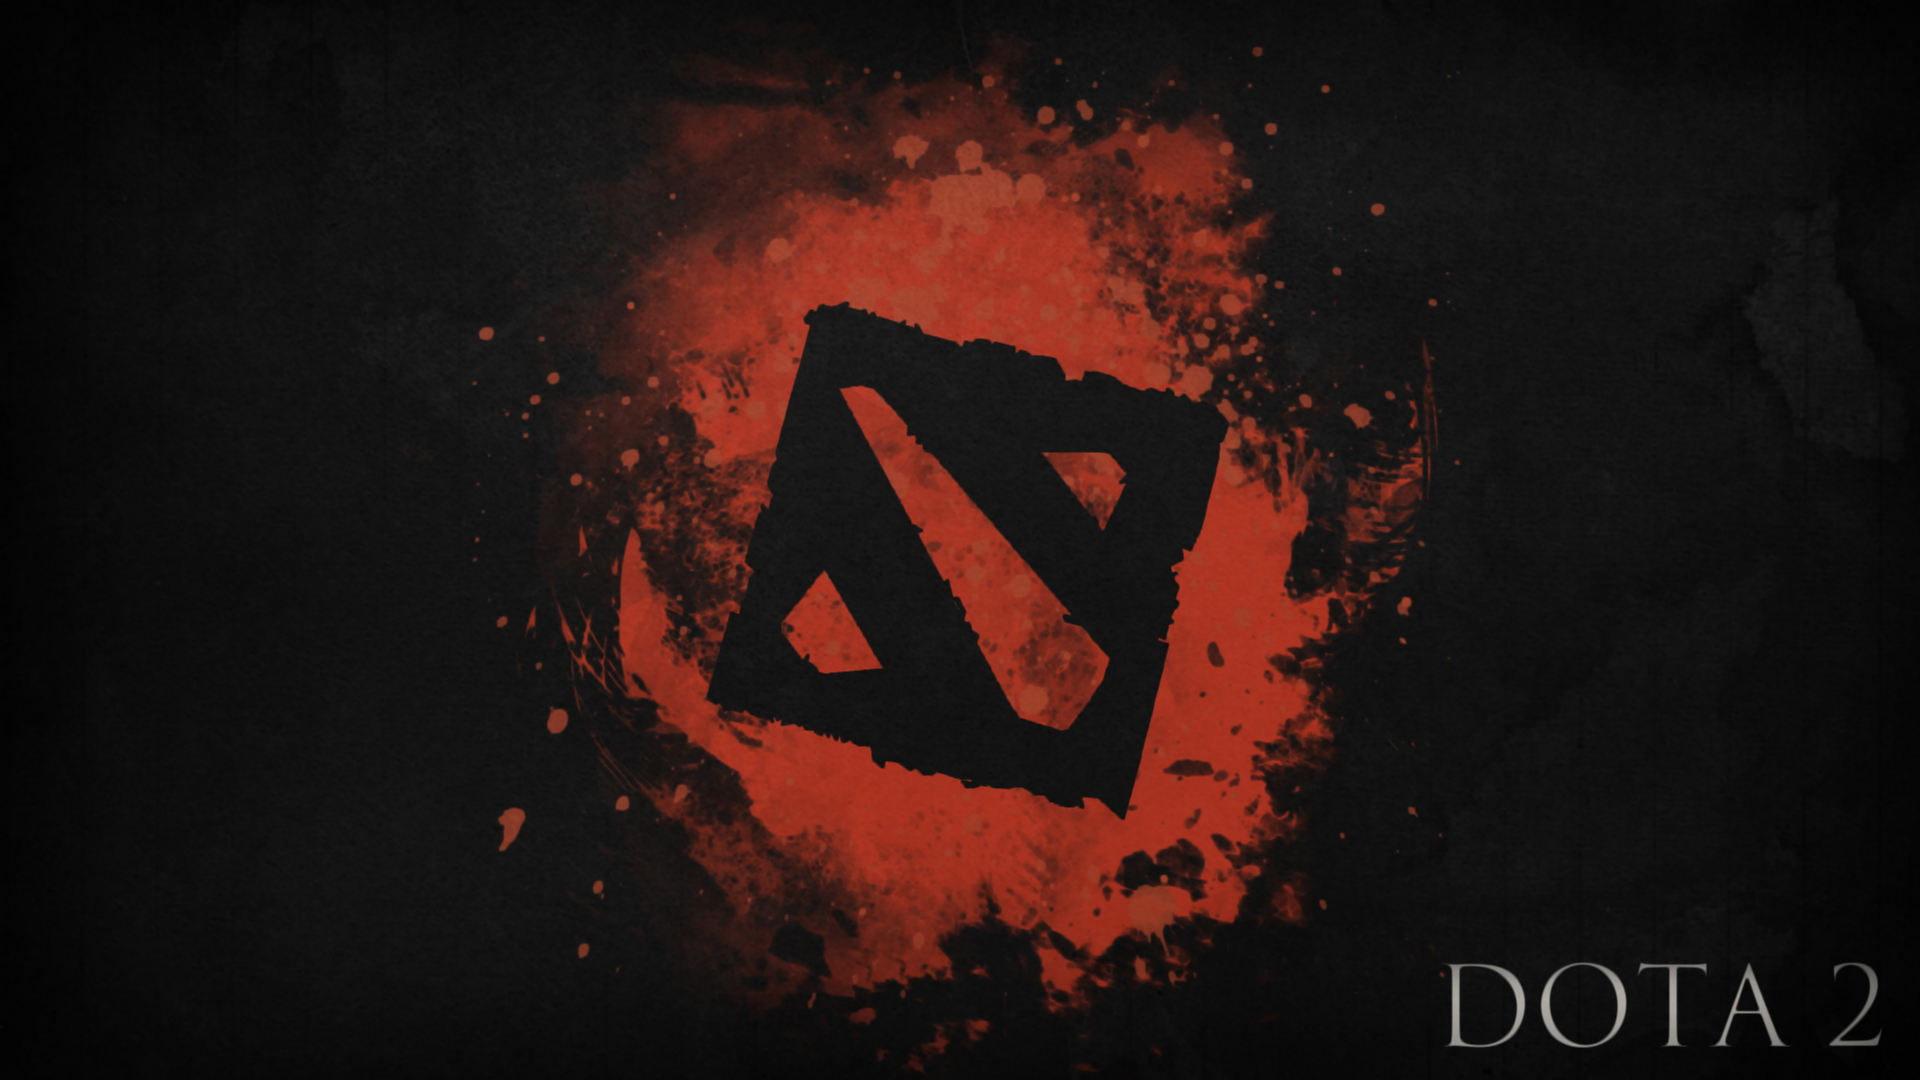 Dota Logo Game HD Wallpaper Image Picture Photo Defense Of The